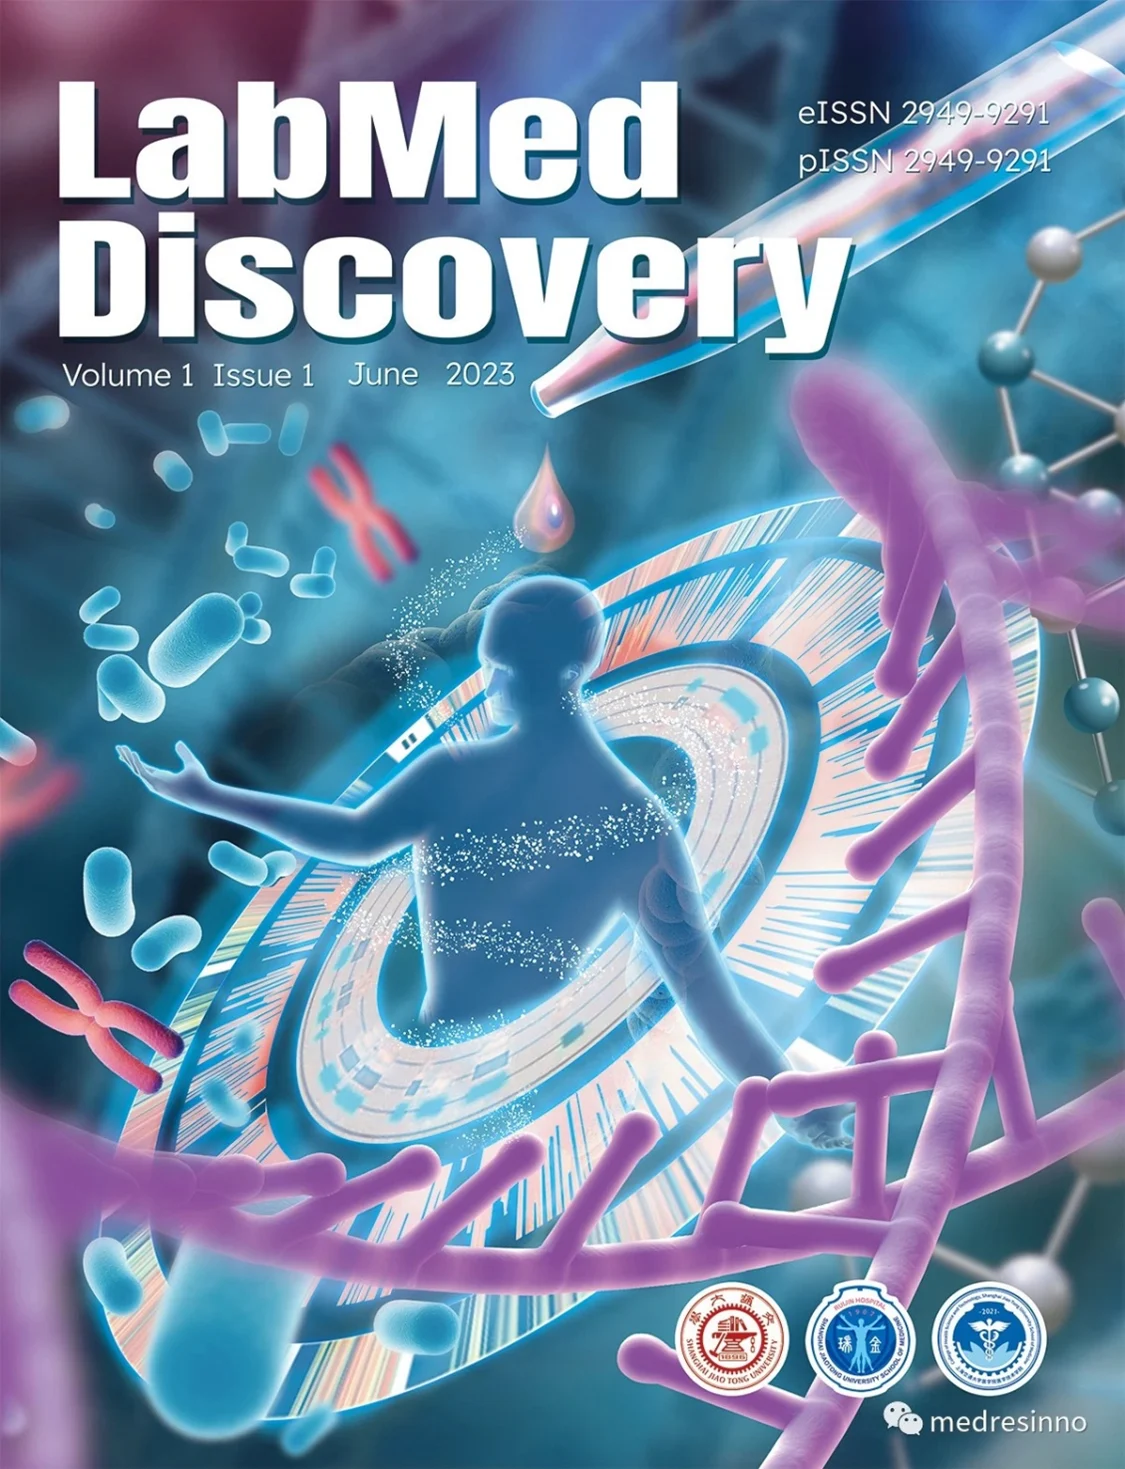 Cover of LabMed Discovery, the first partnership journal between Ruijin Hospital and Elsevier.